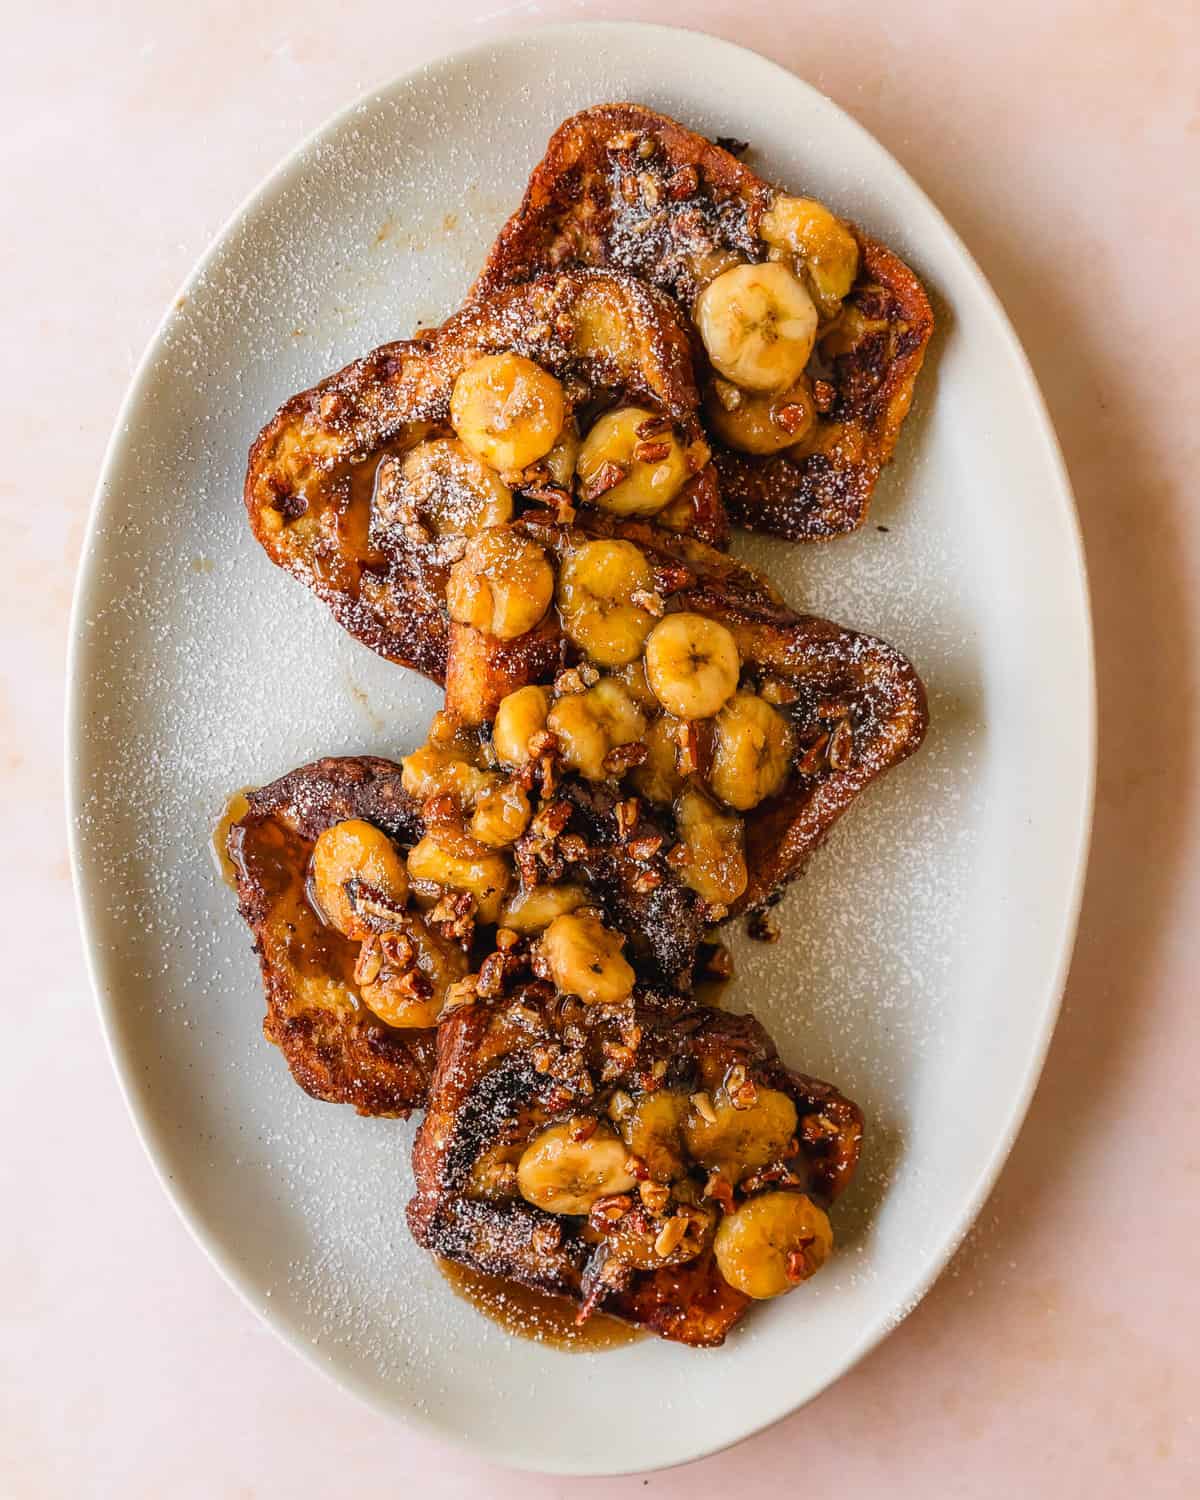 Banana french toast is a simple and decadent french toast made from buttery bread soaked in a rich banana custard, fried to golden perfection. It’s topped with caramelized bananas and chopped nuts. This quick and easy french toast with bananas makes the perfect indulgent breakfast or brunch. 